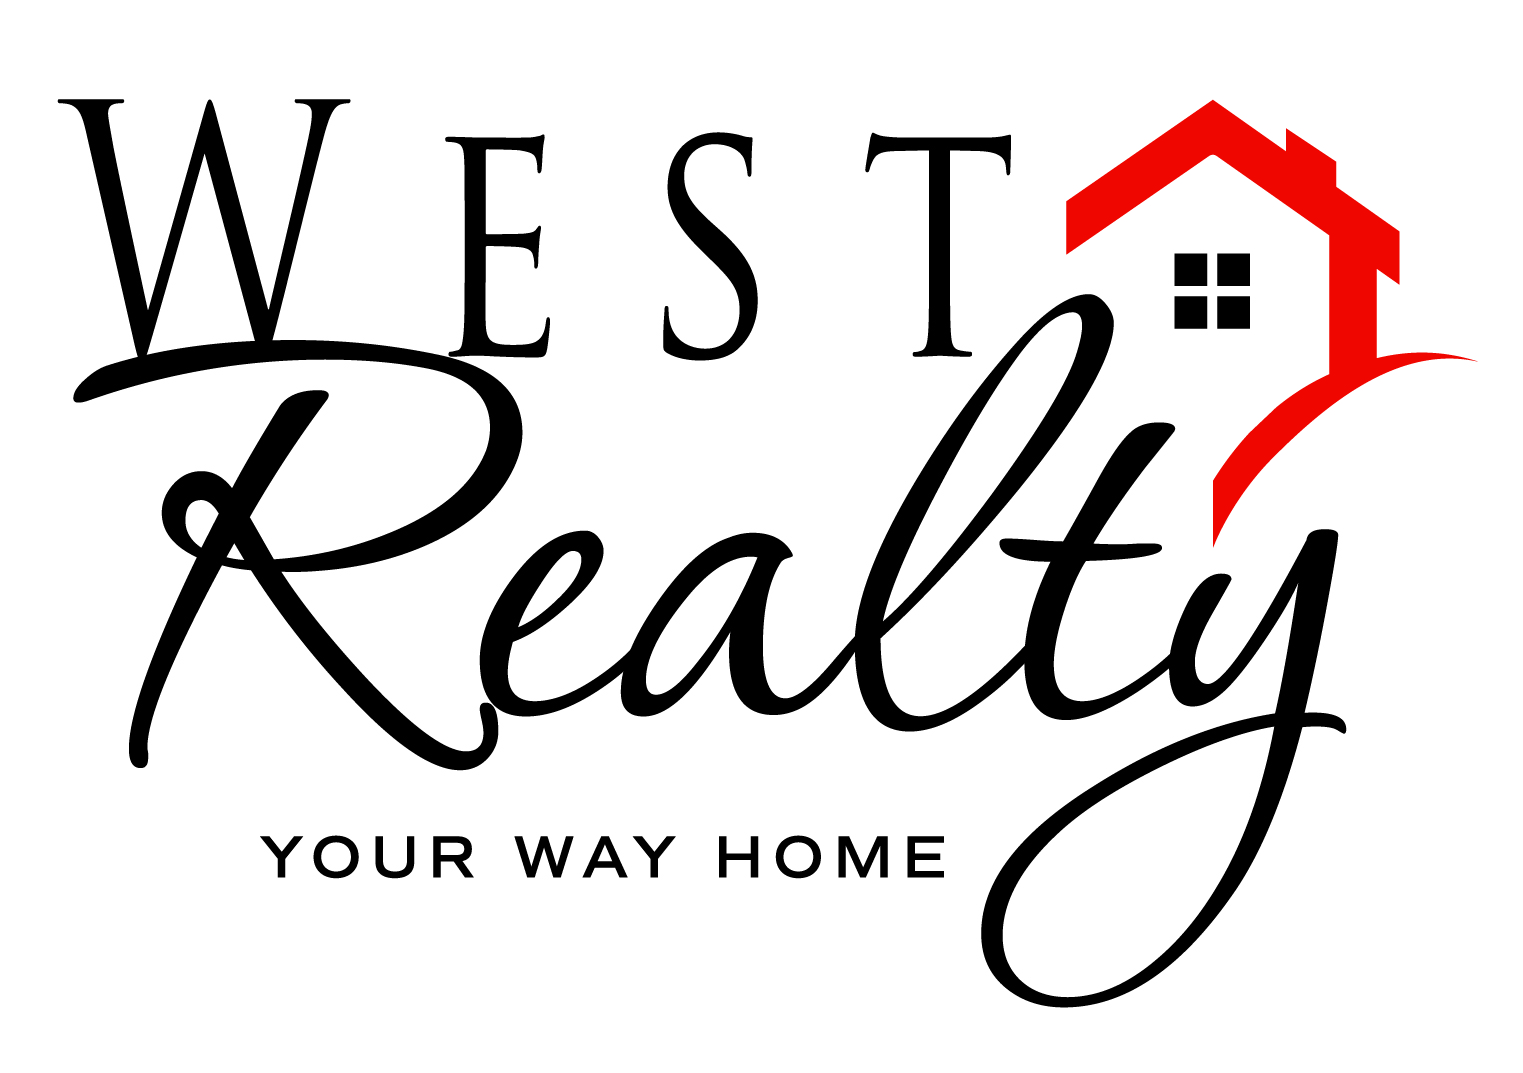 West realty (Expositor)